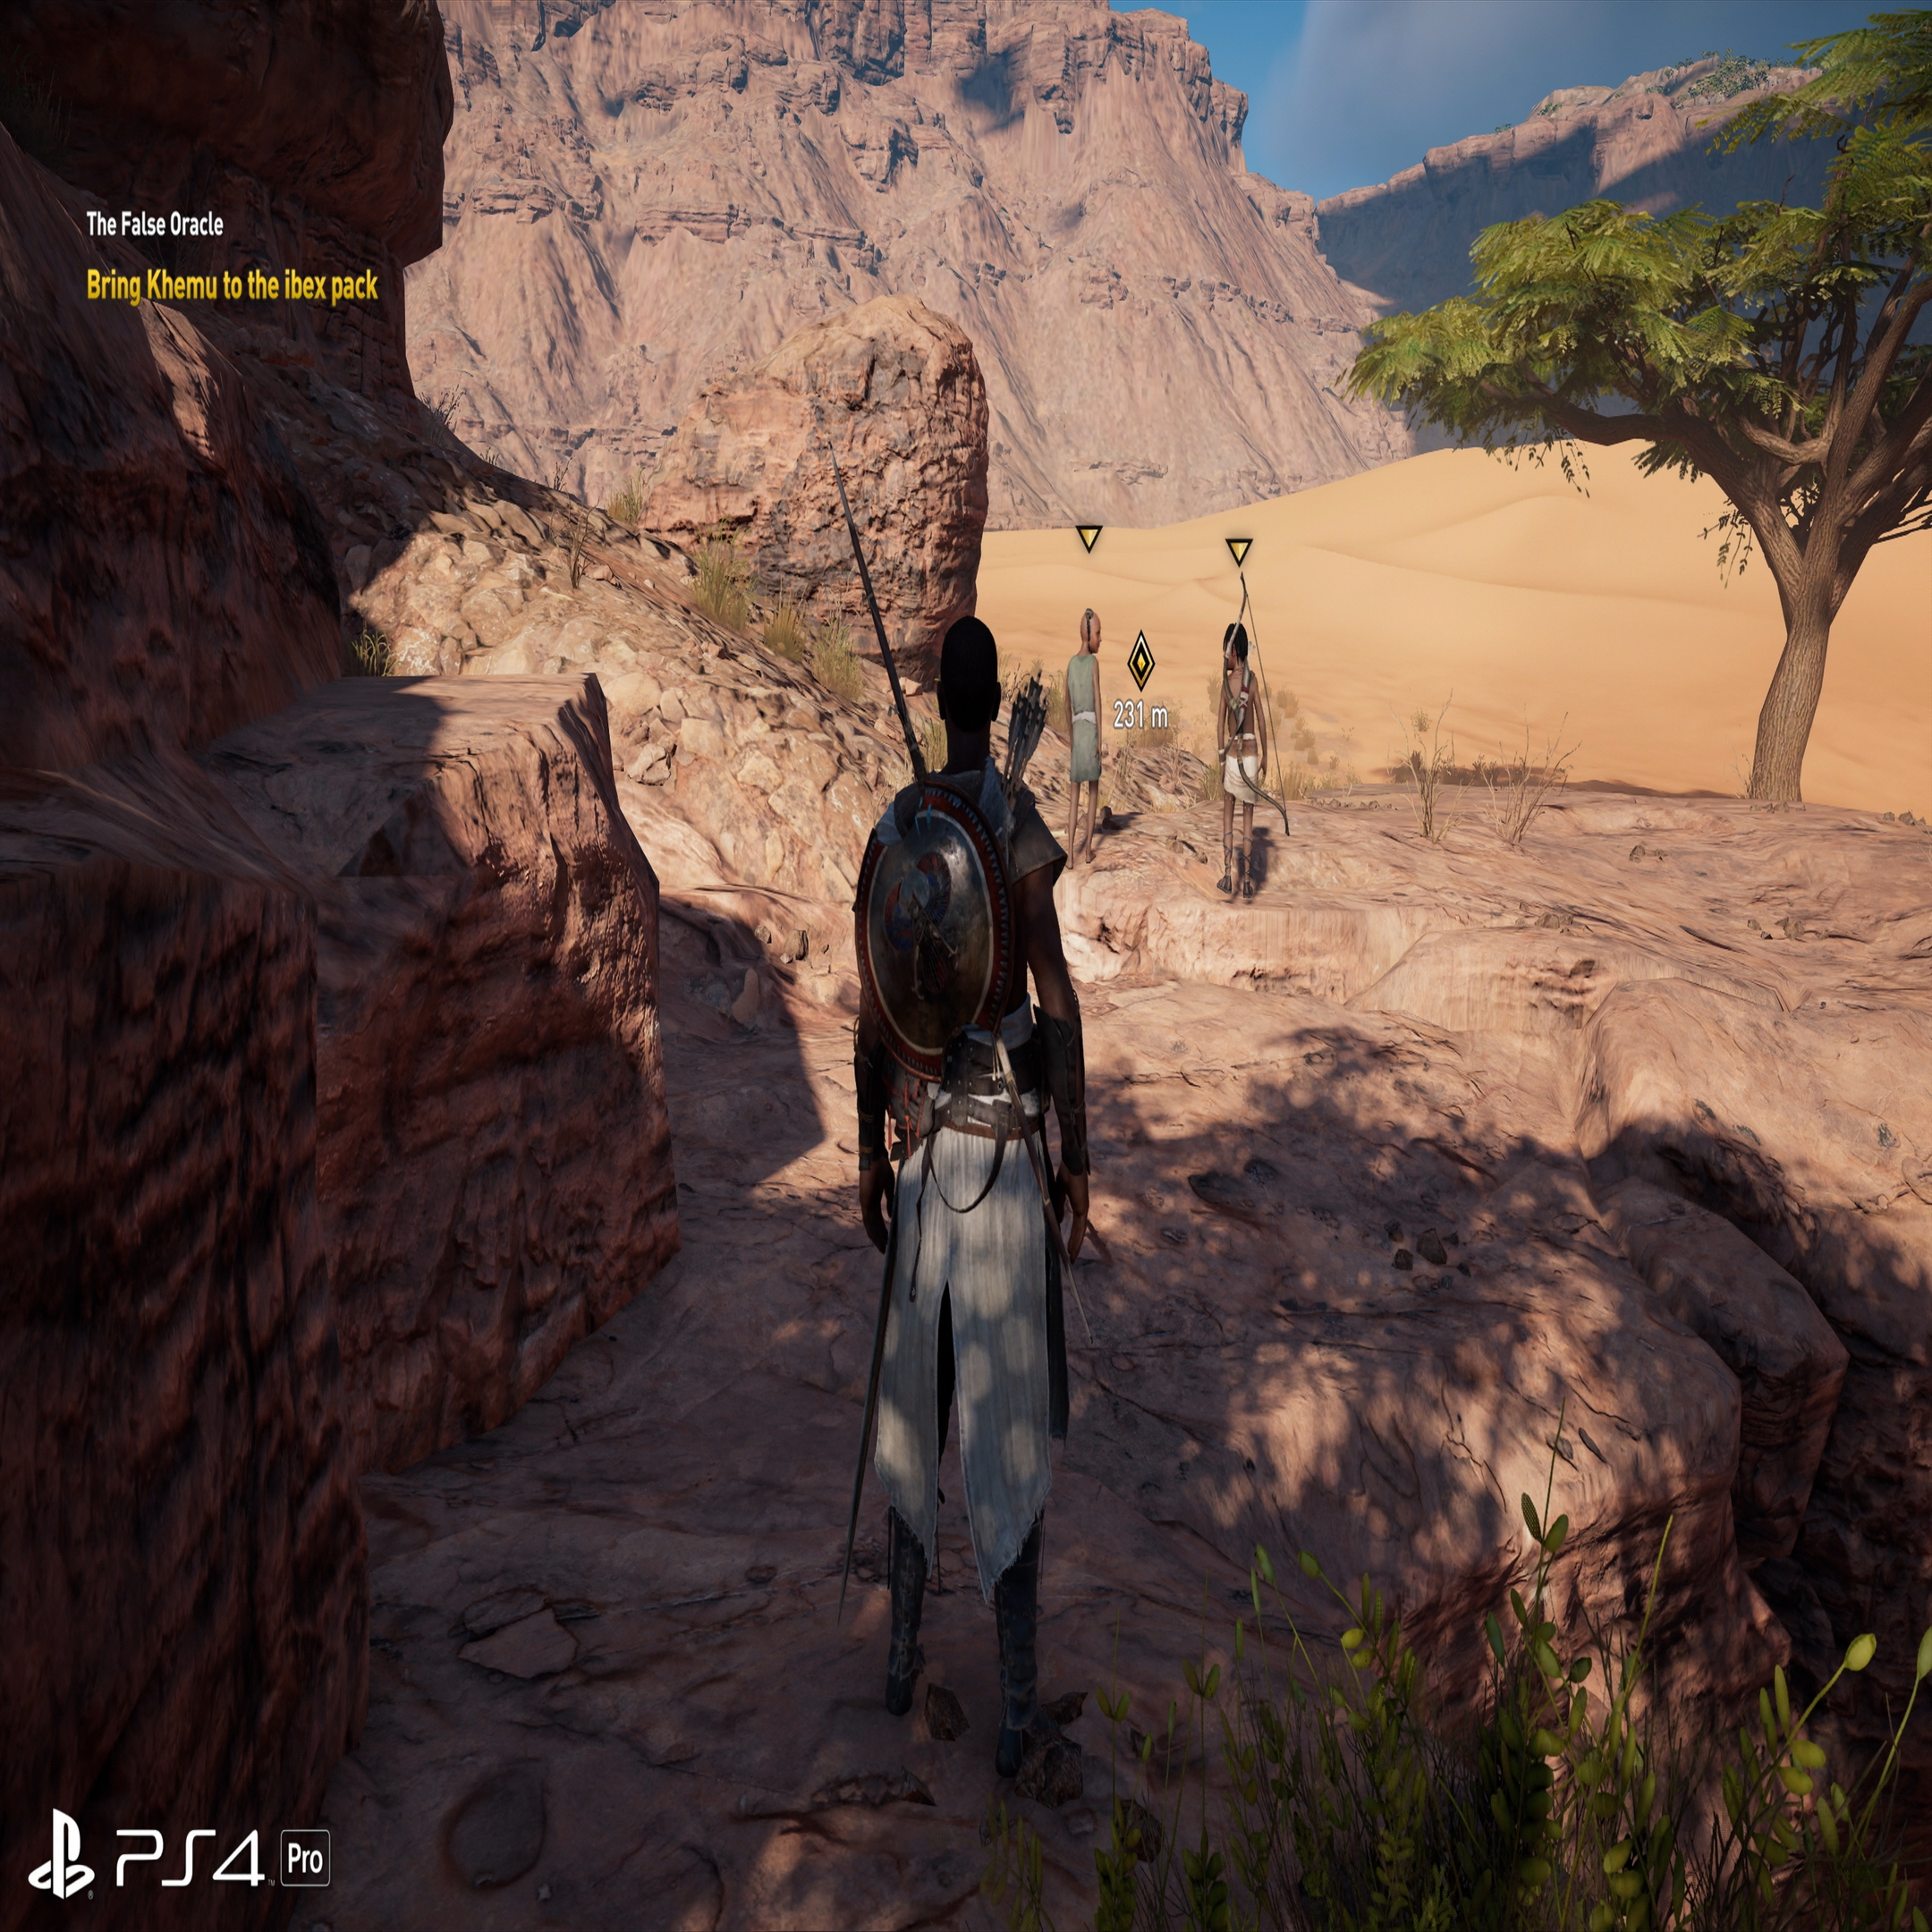 Can I play Assassin's Creed Origins on my PC? If yes, then what